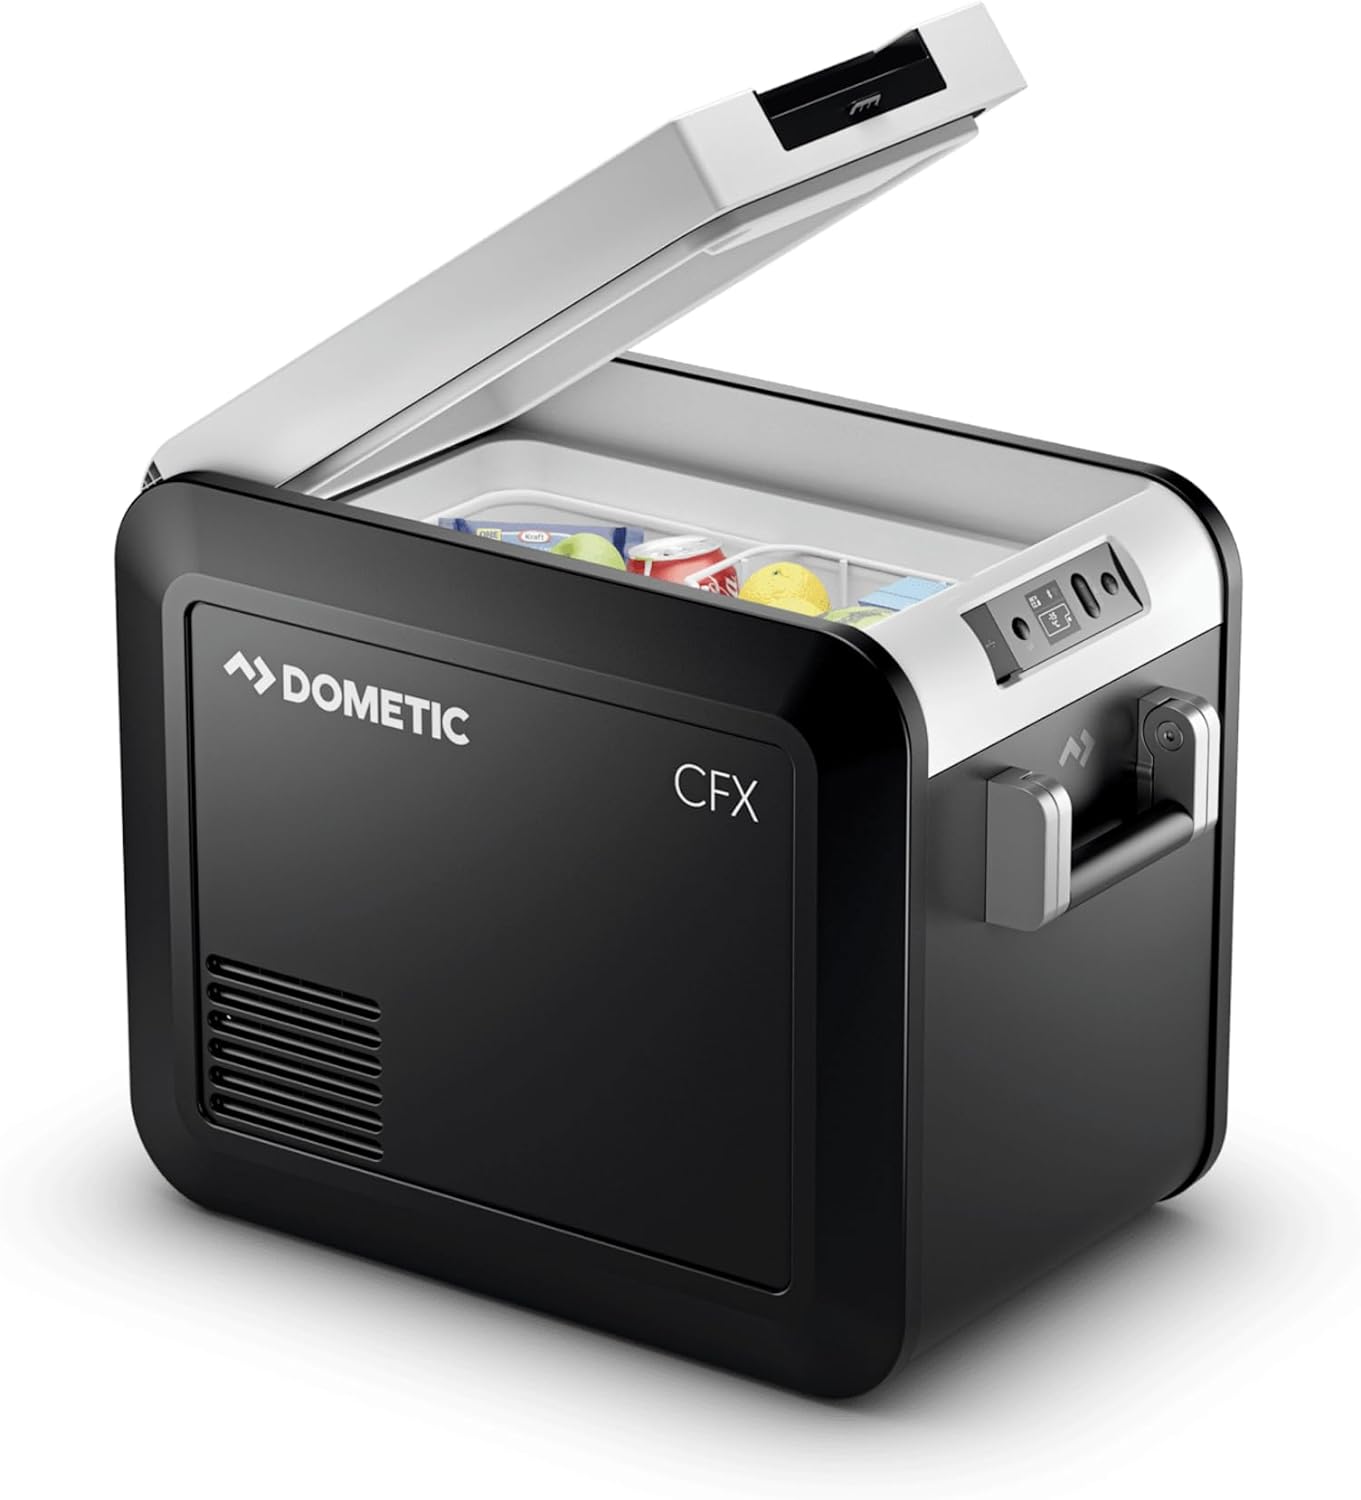 Dometic CFX25 Portable Refrigerator/Freezer - Compact and efficient cooling solution.